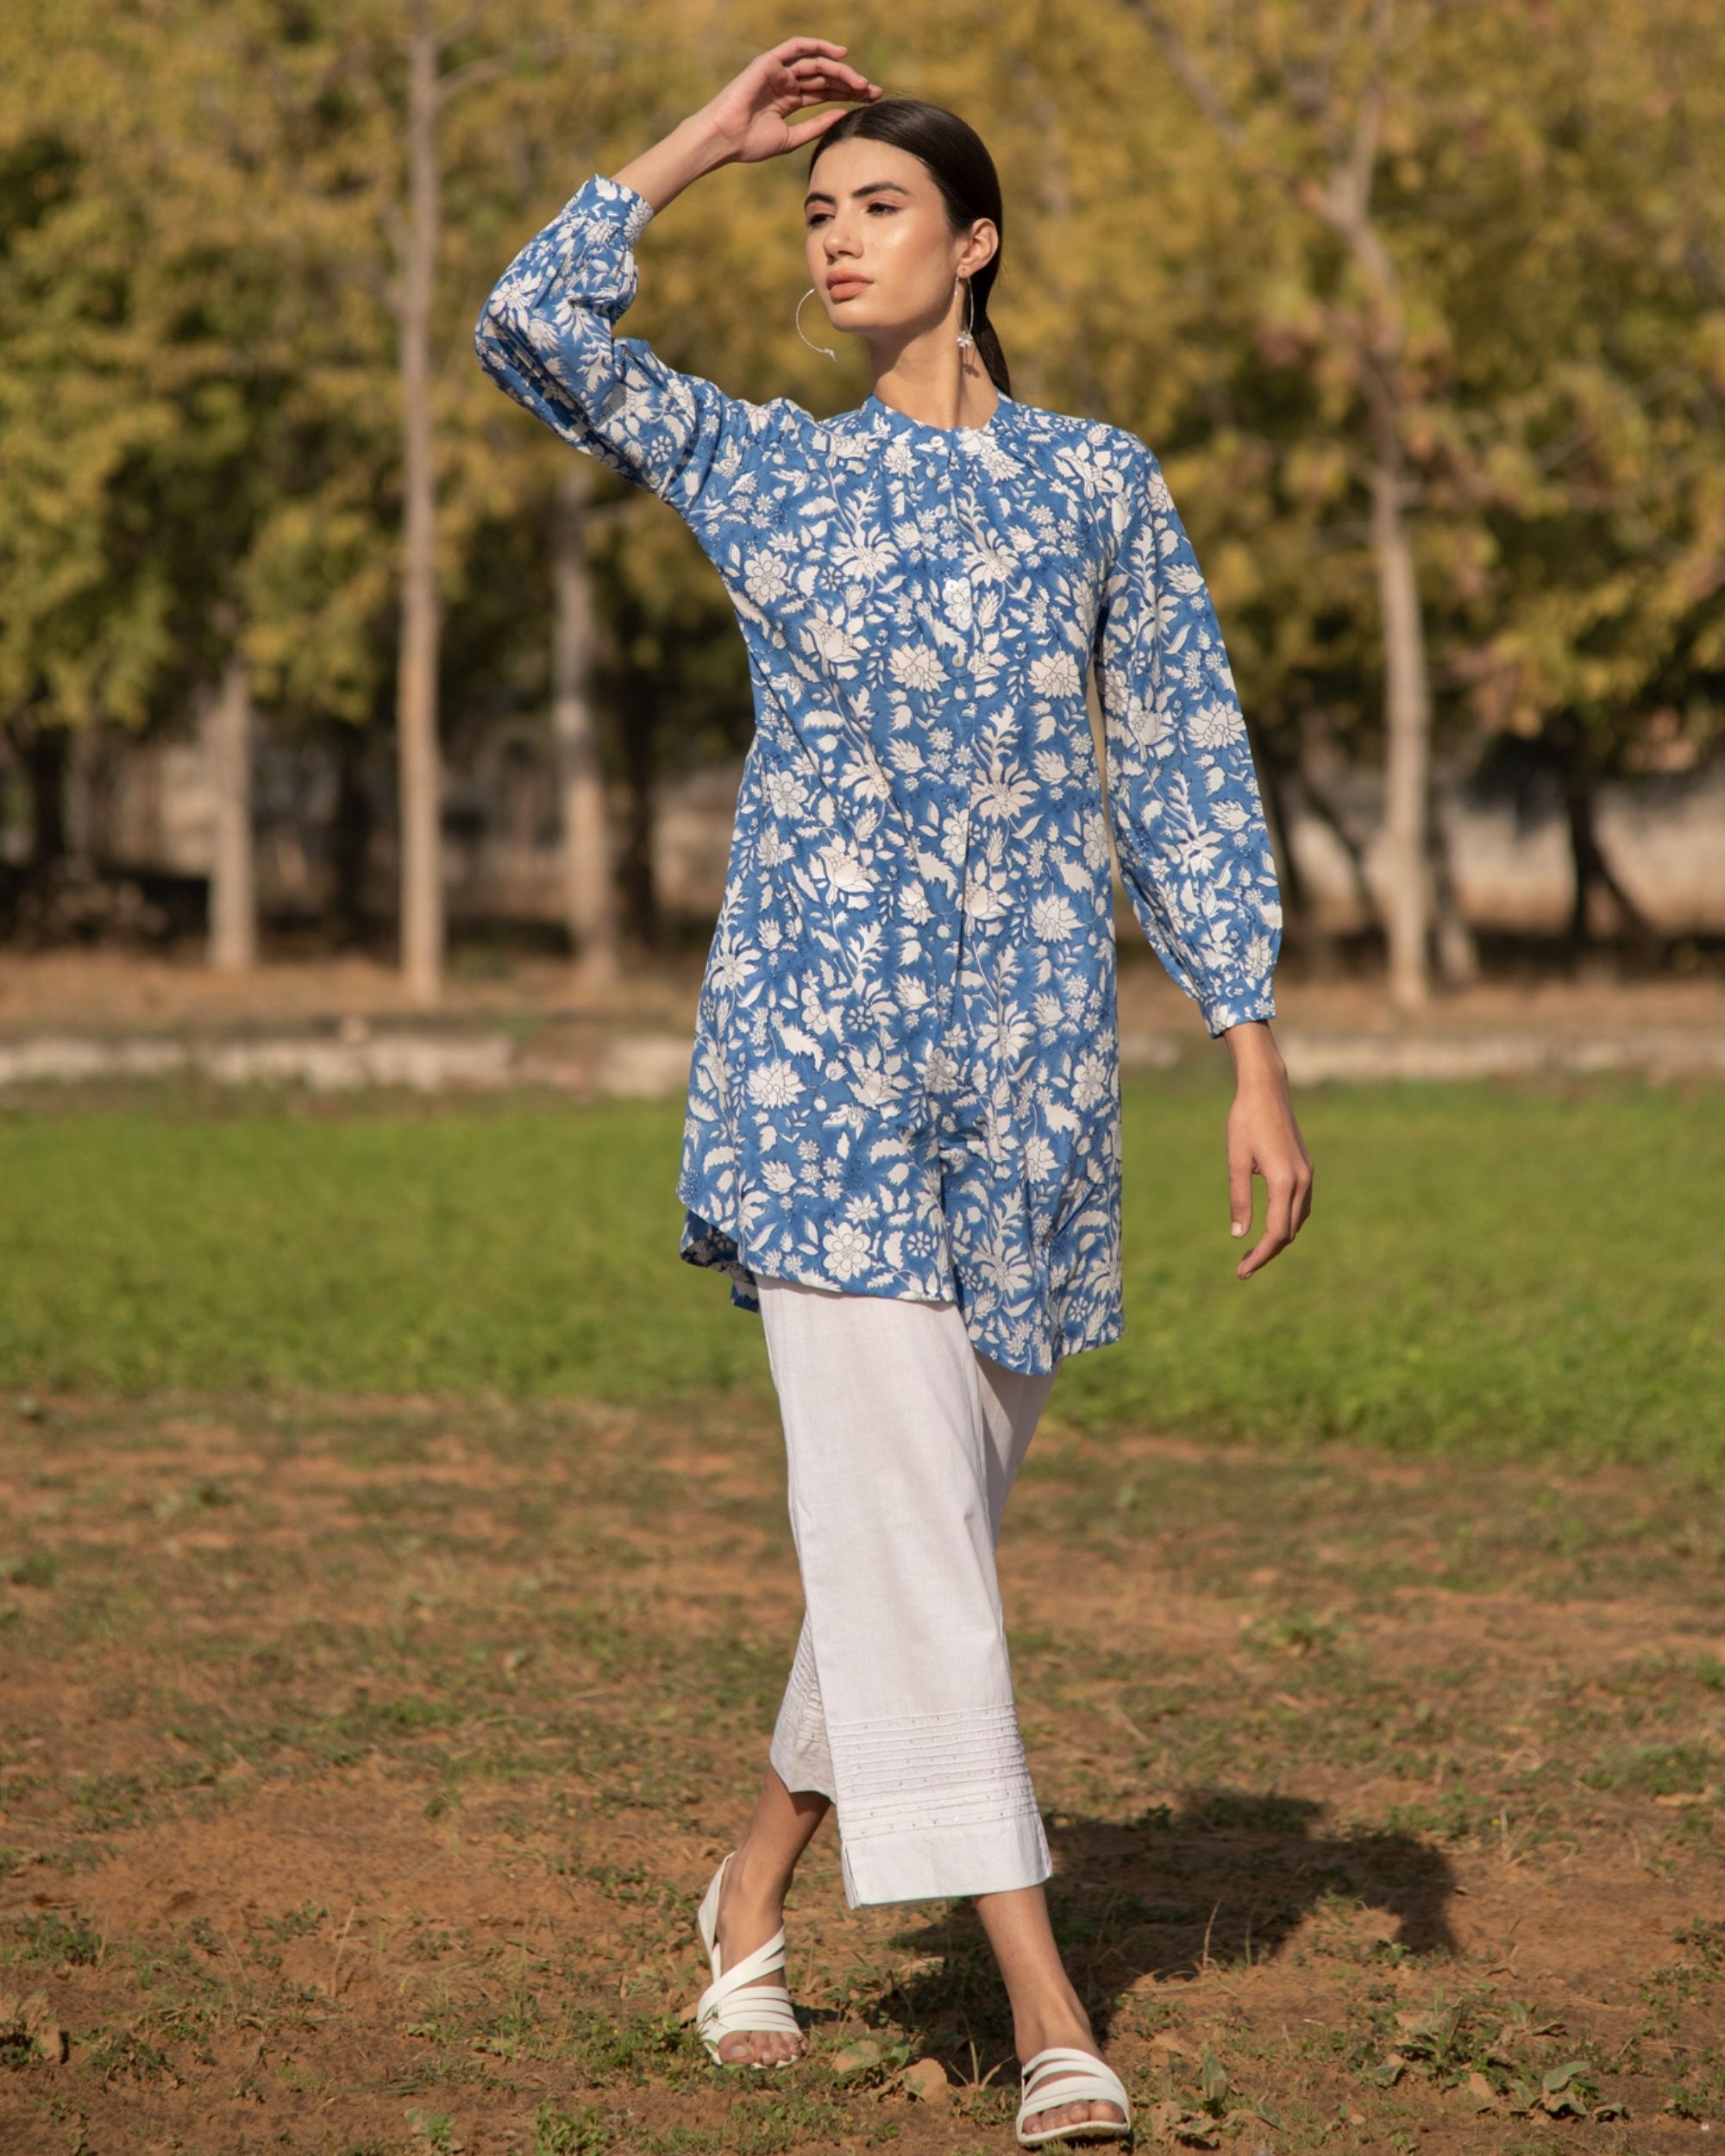 Cool blue tunic by Marche